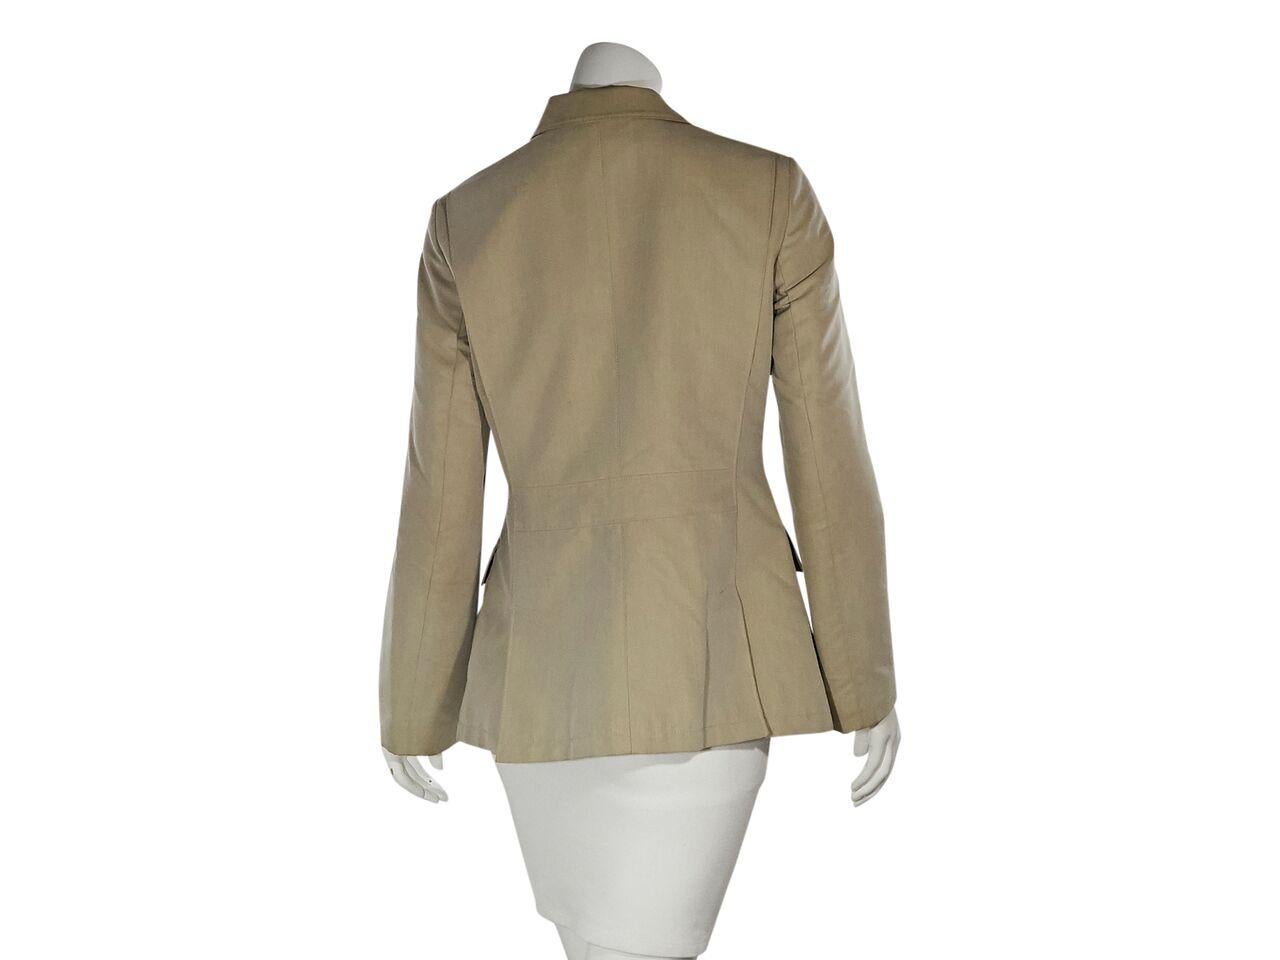 Product details:  Beige cotton-blend jacket by Loro Piana.  Notched lapel.  Long sleeves.  Button-front placket over zip closure.  Chest besom pocket.  Waist flap pockets.  Back double hem vents.  36